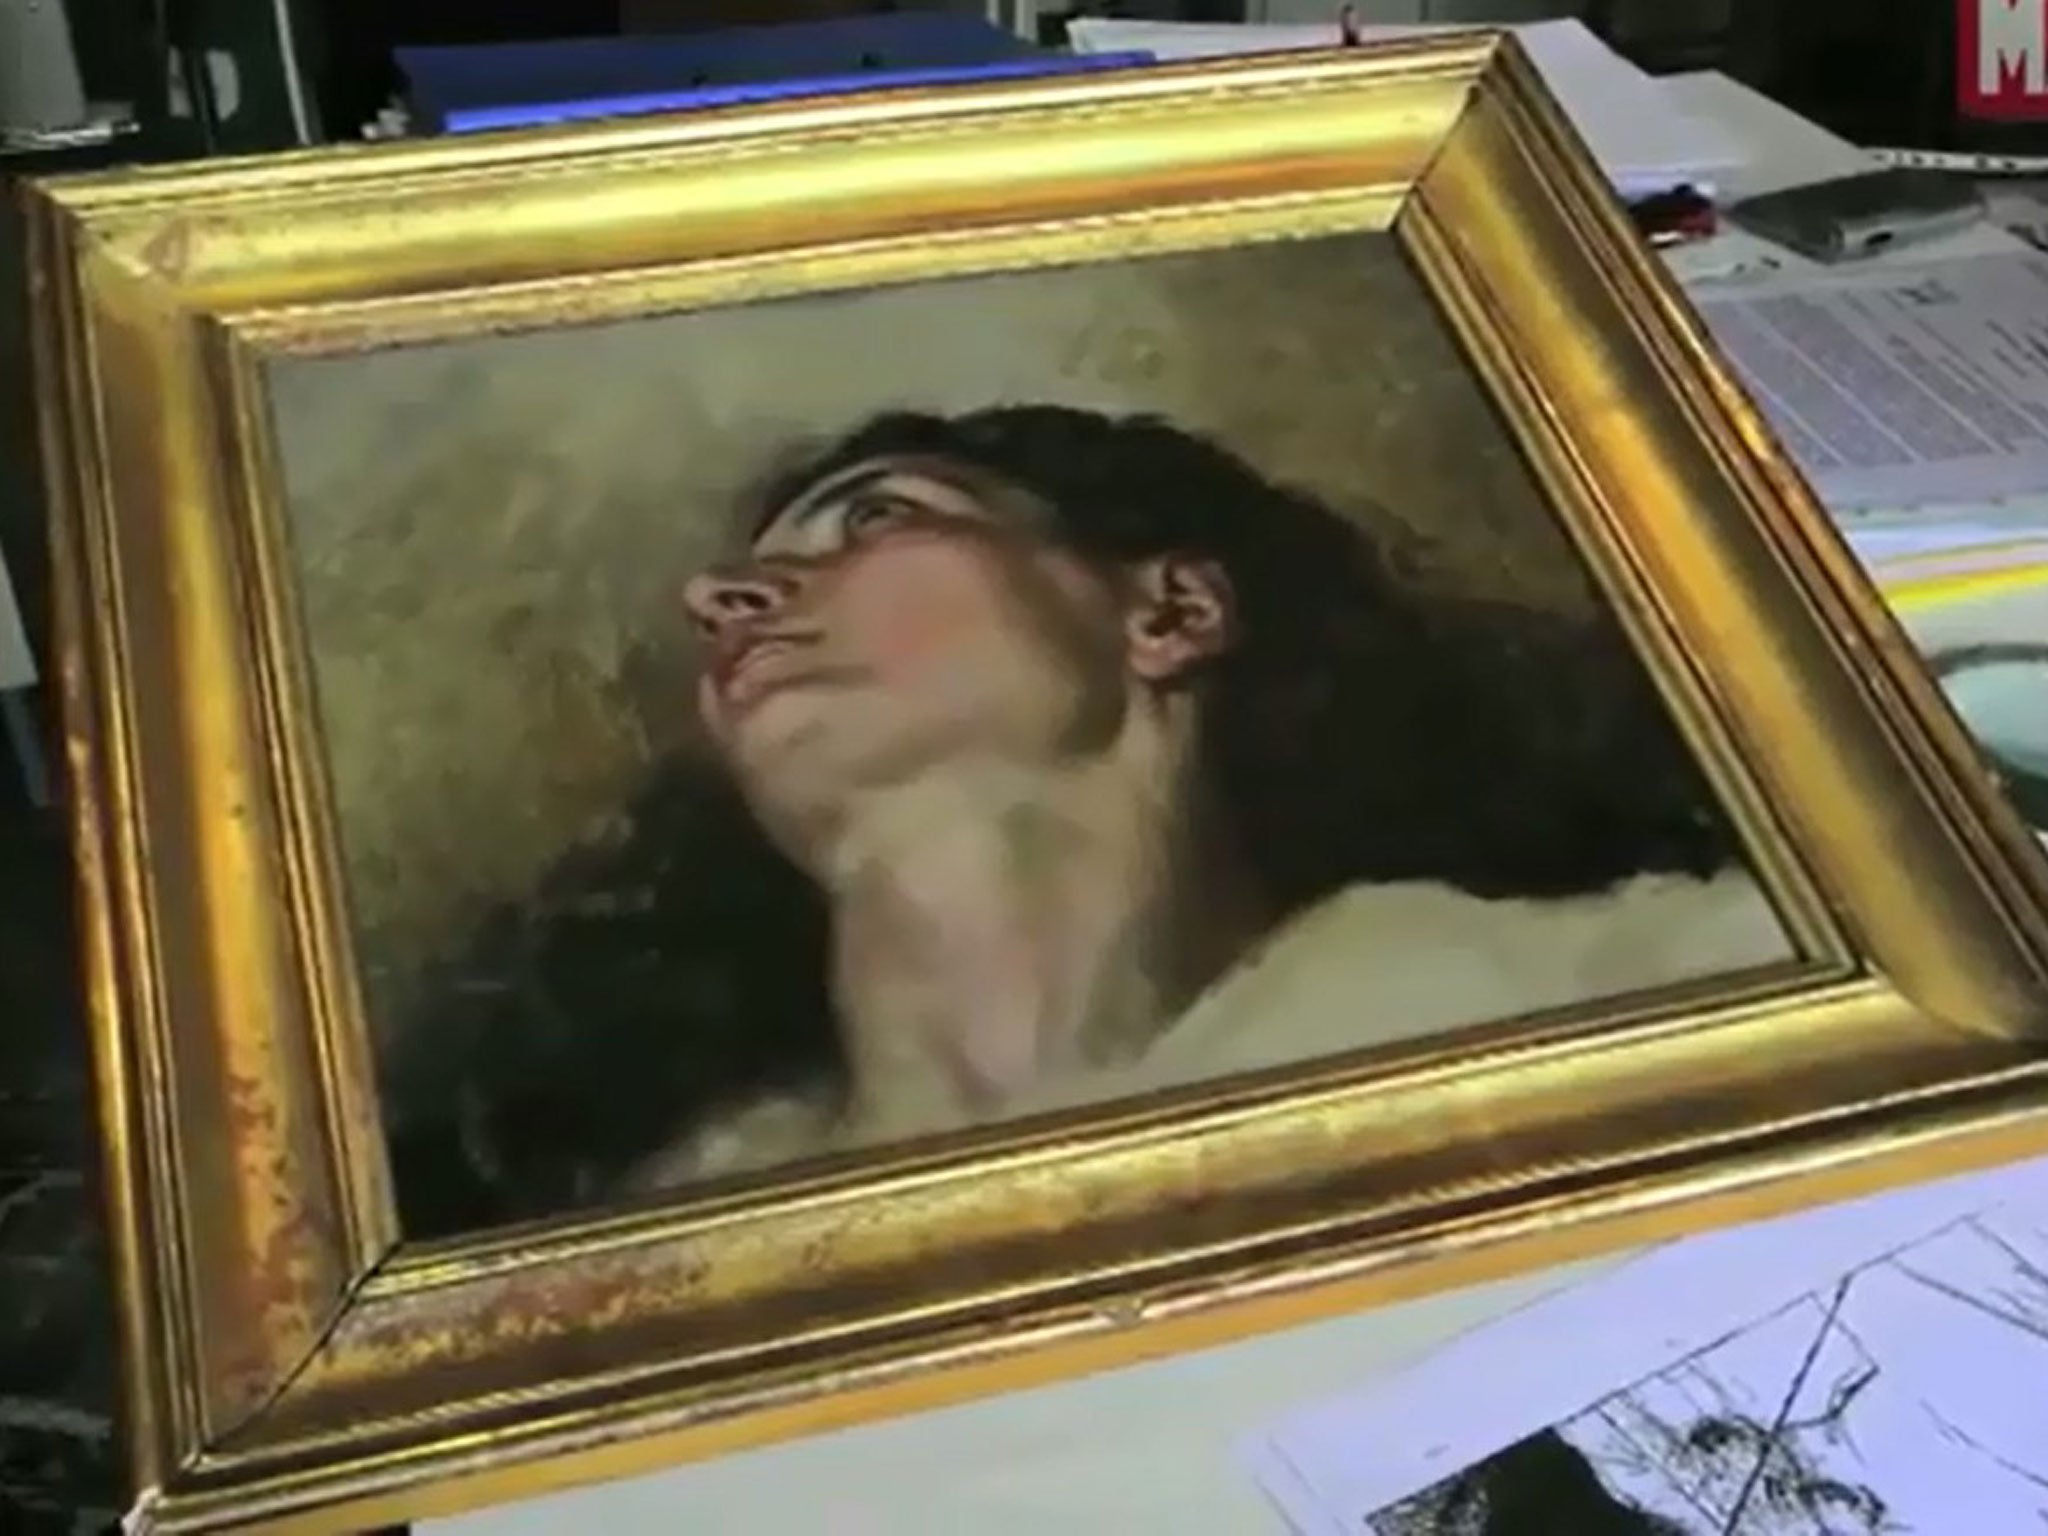 The newly-discovered canvas may put a face to Courbet's masterpiece The Origin of the World